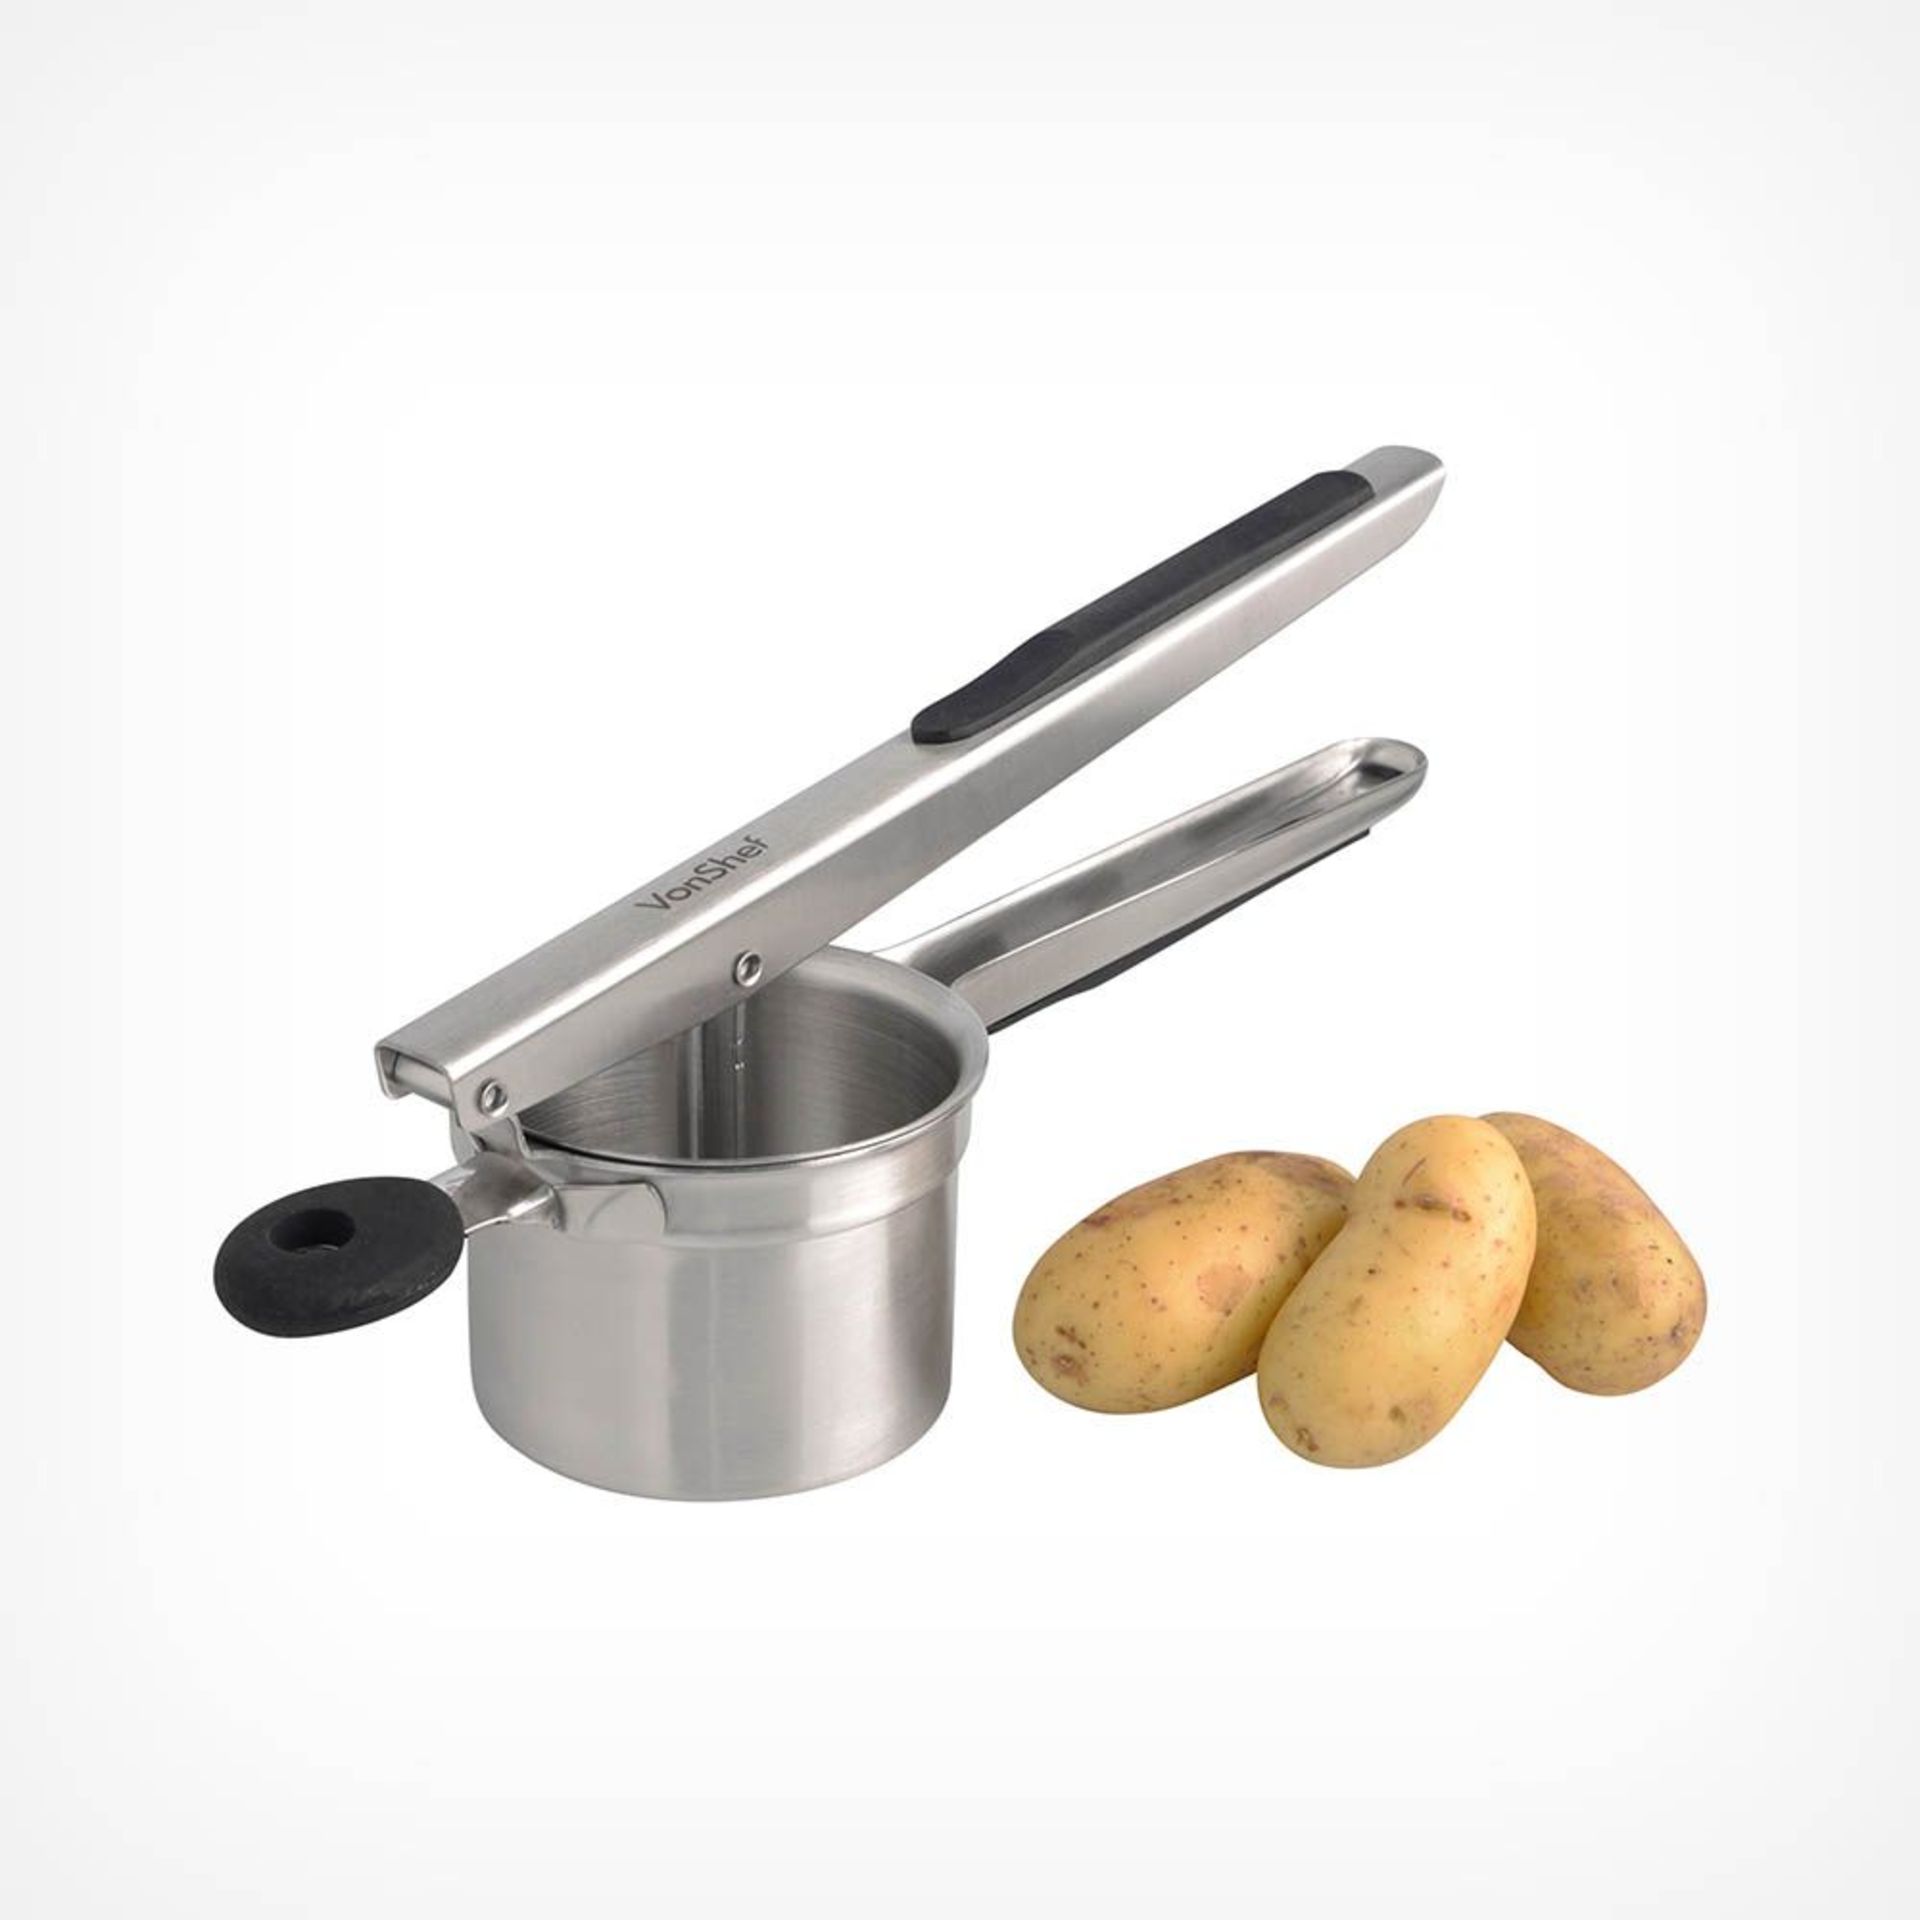 Steel Potato Ricer. - S2. The ricer can also be used as a fruit press and allows you to create